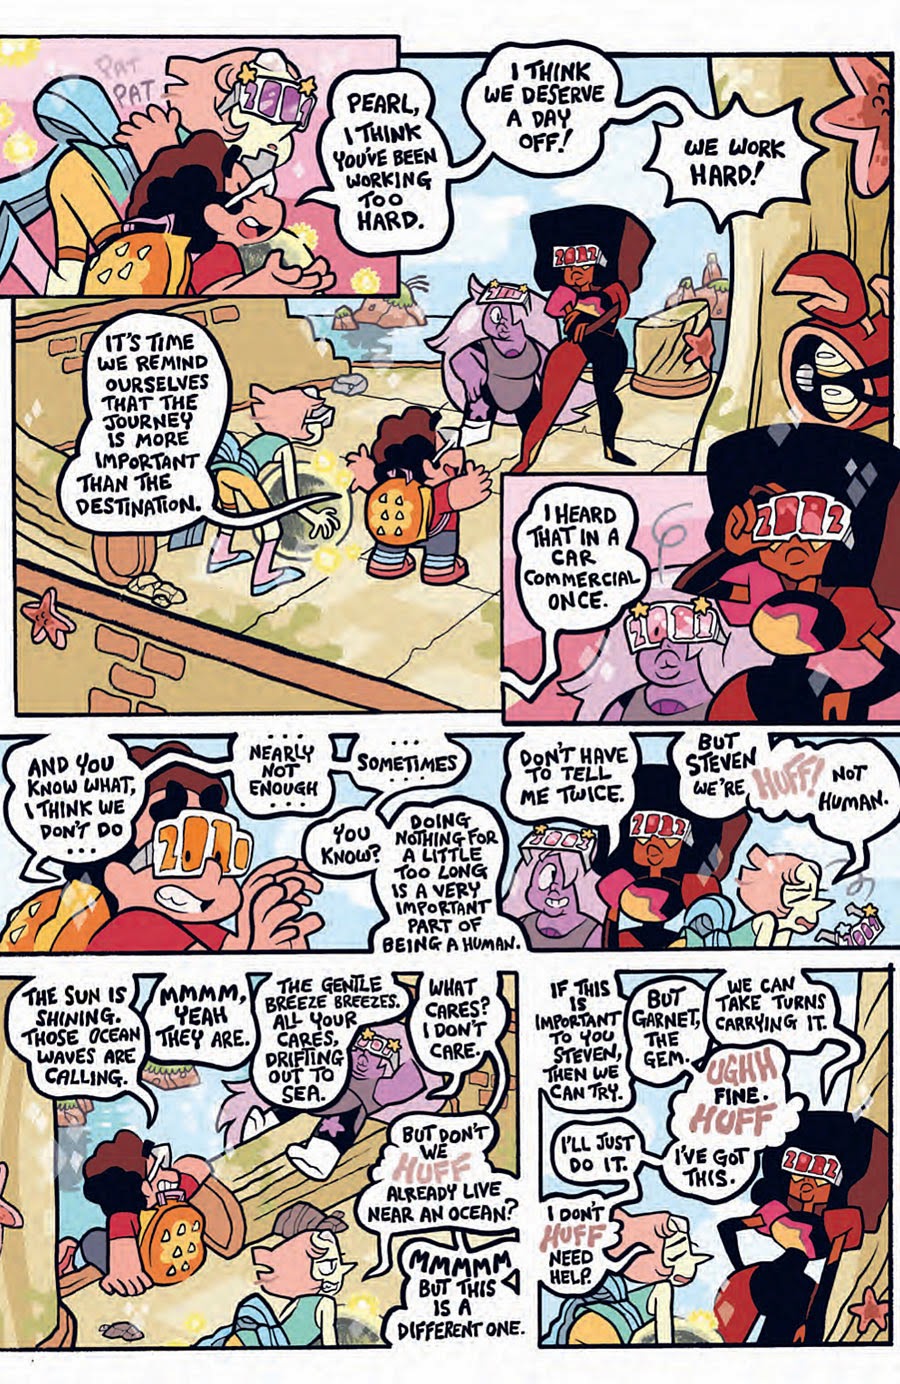 im loving these steven universe comics from boomstudios 6